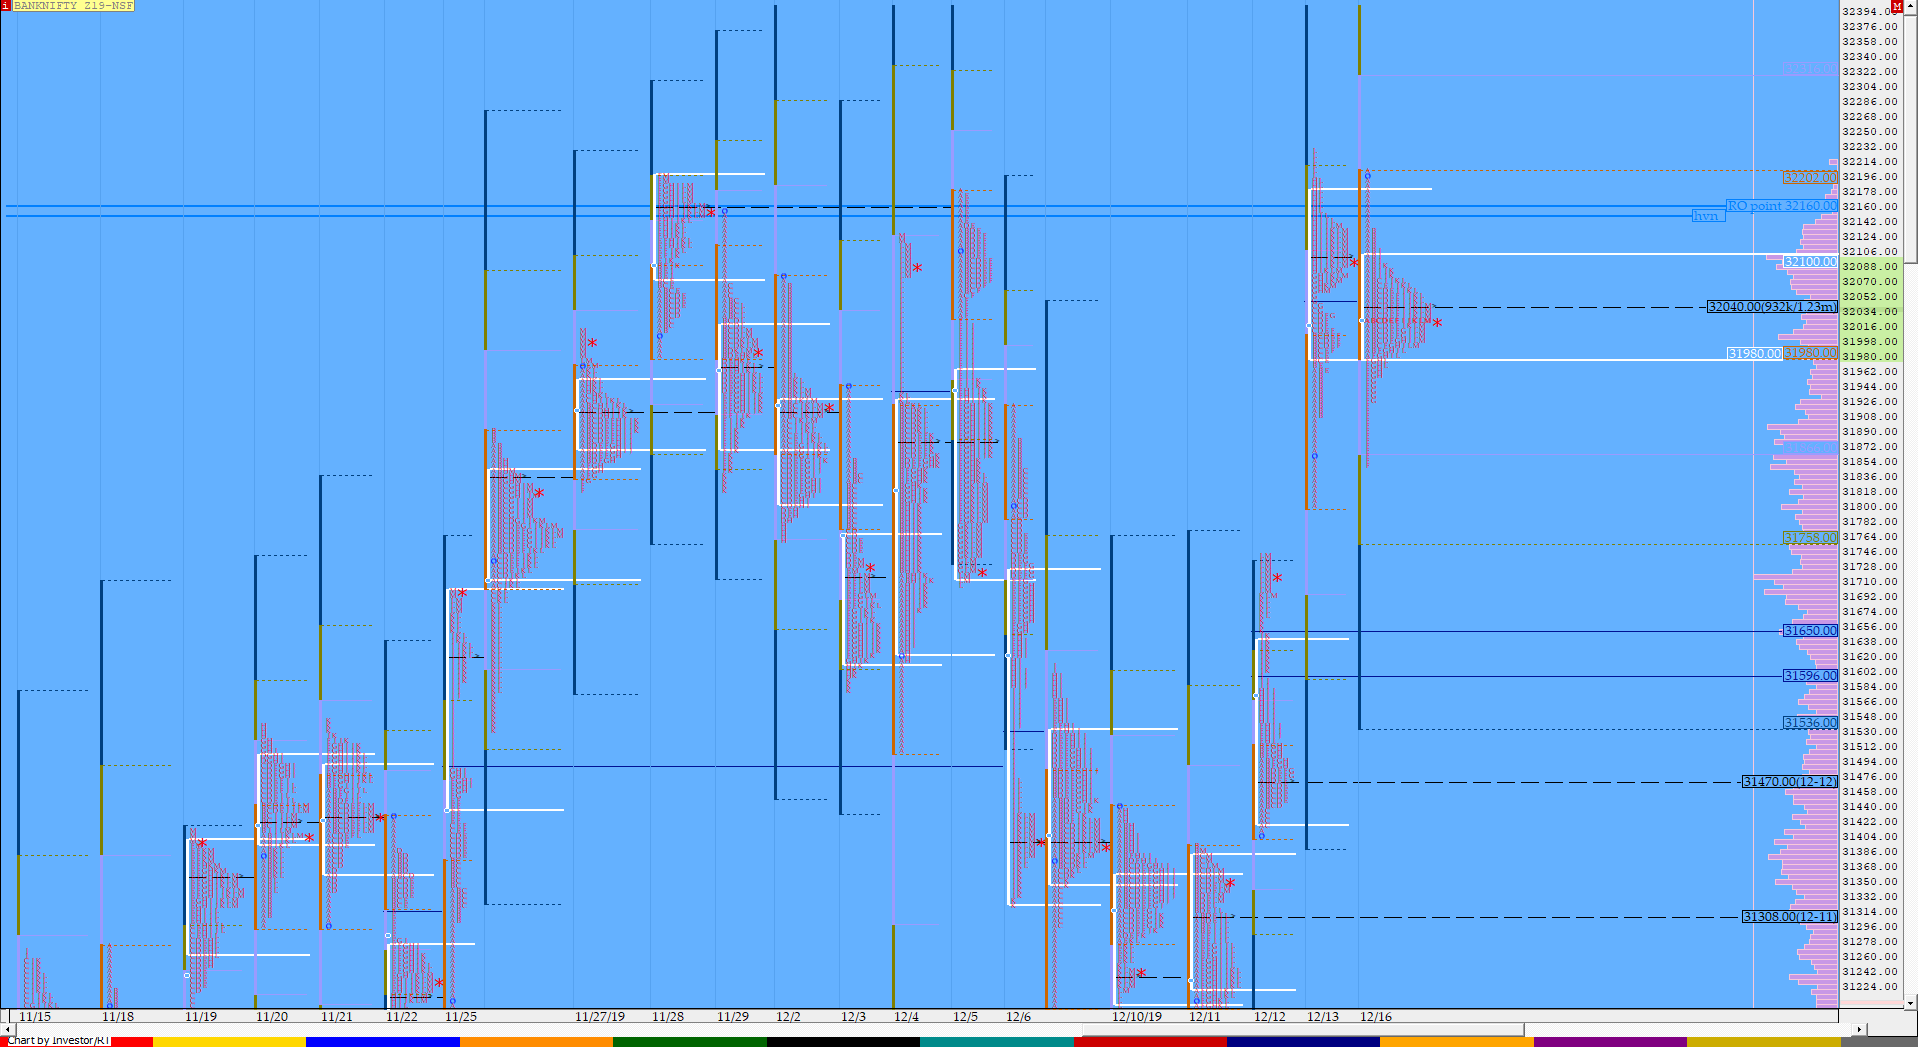 Bnf Compo1 11 Market Profile Analysis Dated 16Th December Banknifty Futures, Charts, Day Trading, Intraday Trading, Intraday Trading Strategies, Market Profile, Market Profile Trading Strategies, Nifty Futures, Order Flow Analysis, Support And Resistance, Technical Analysis, Trading Strategies, Volume Profile Trading